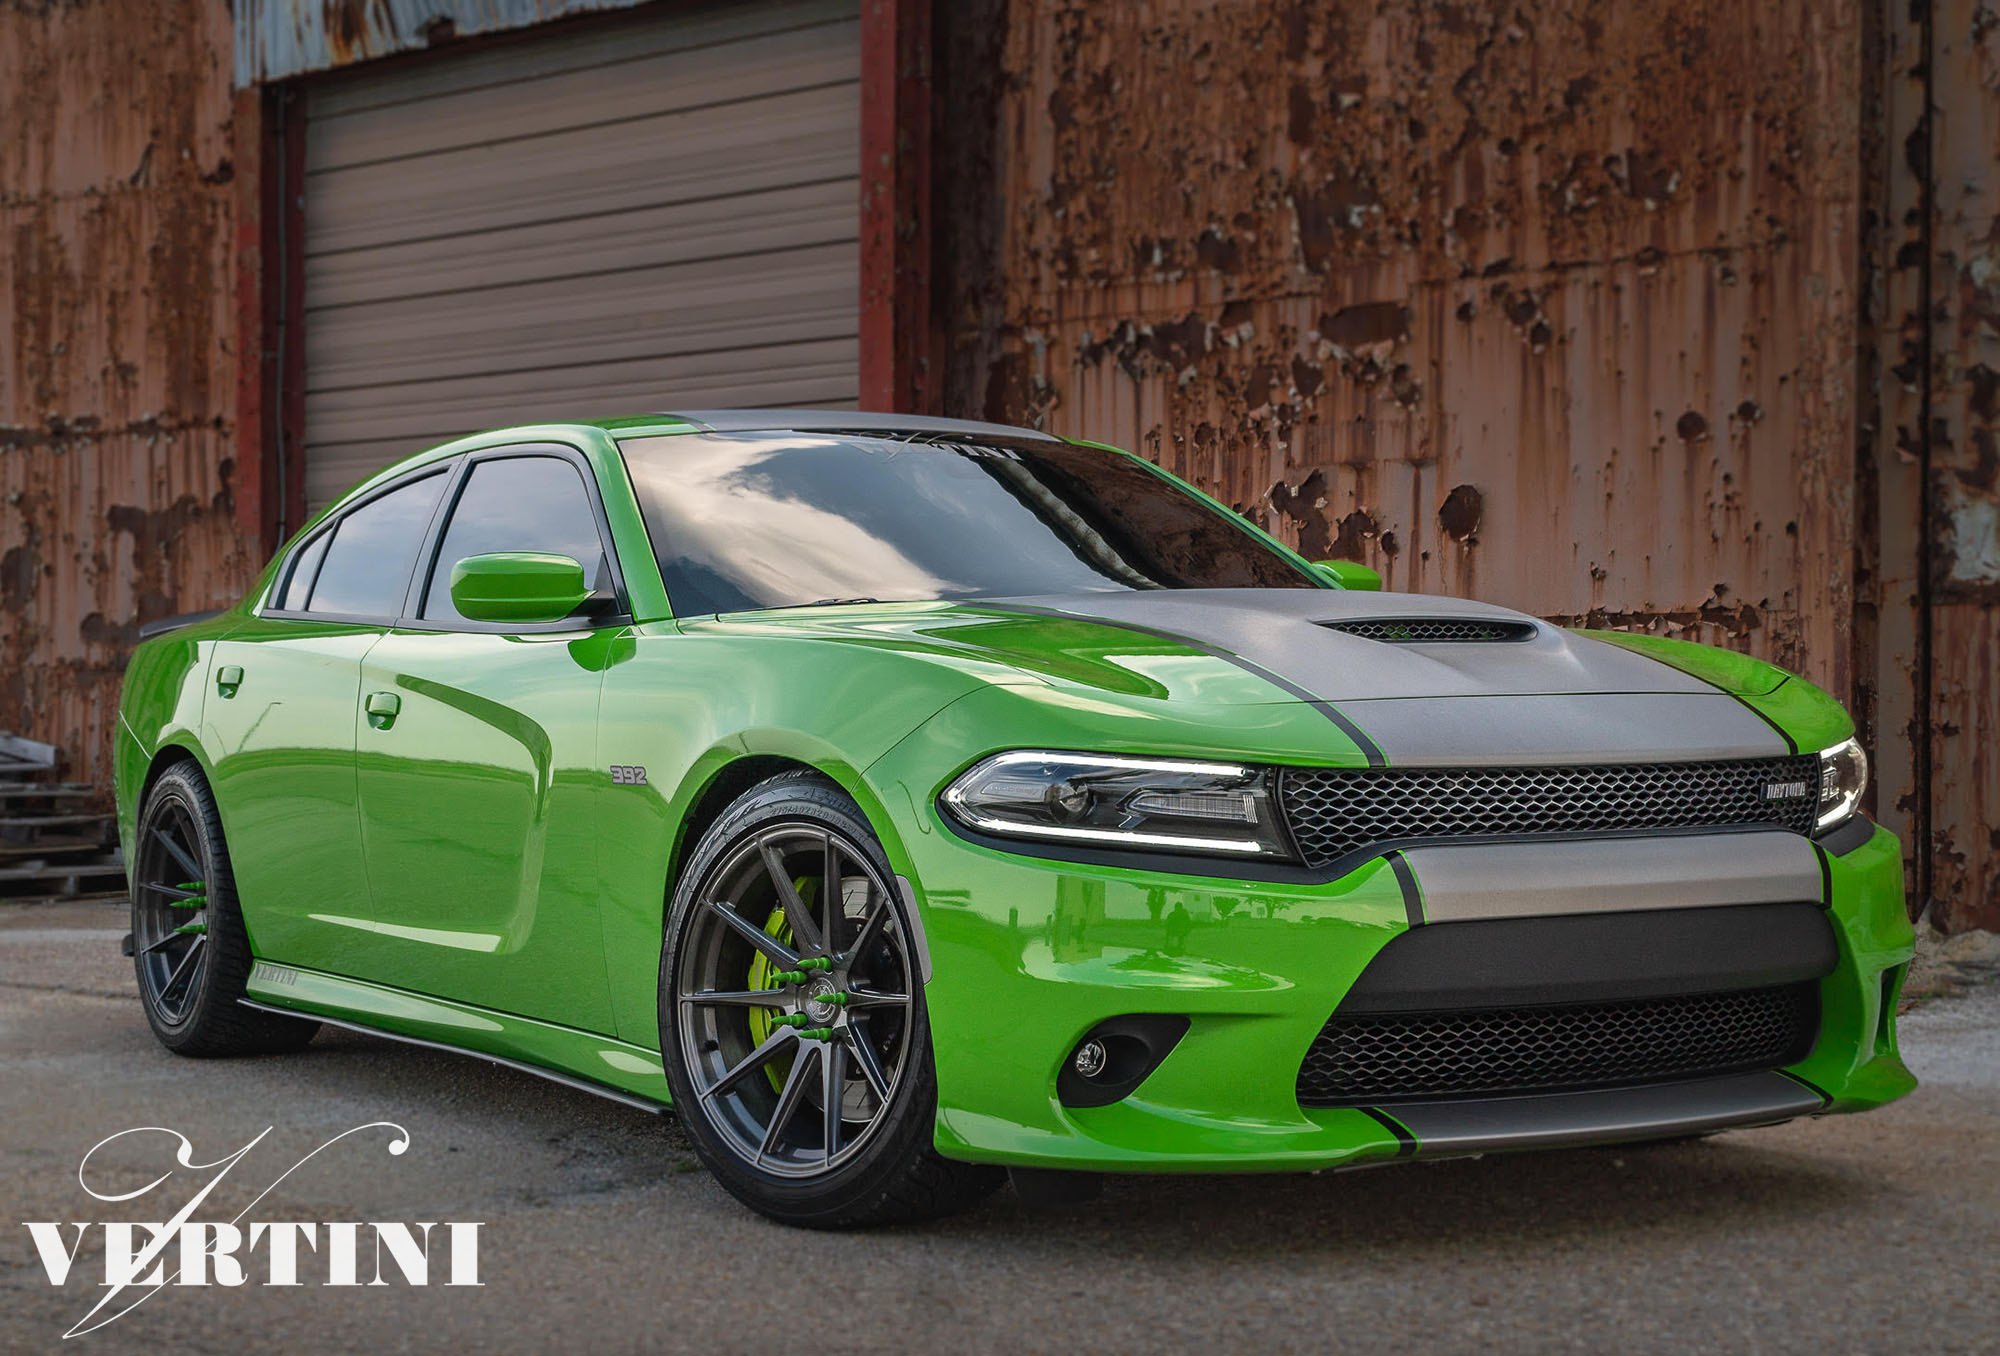 Aftermarket Vented Hood on Green Dodge Charger Daytona - Photo by Vertini Wheels